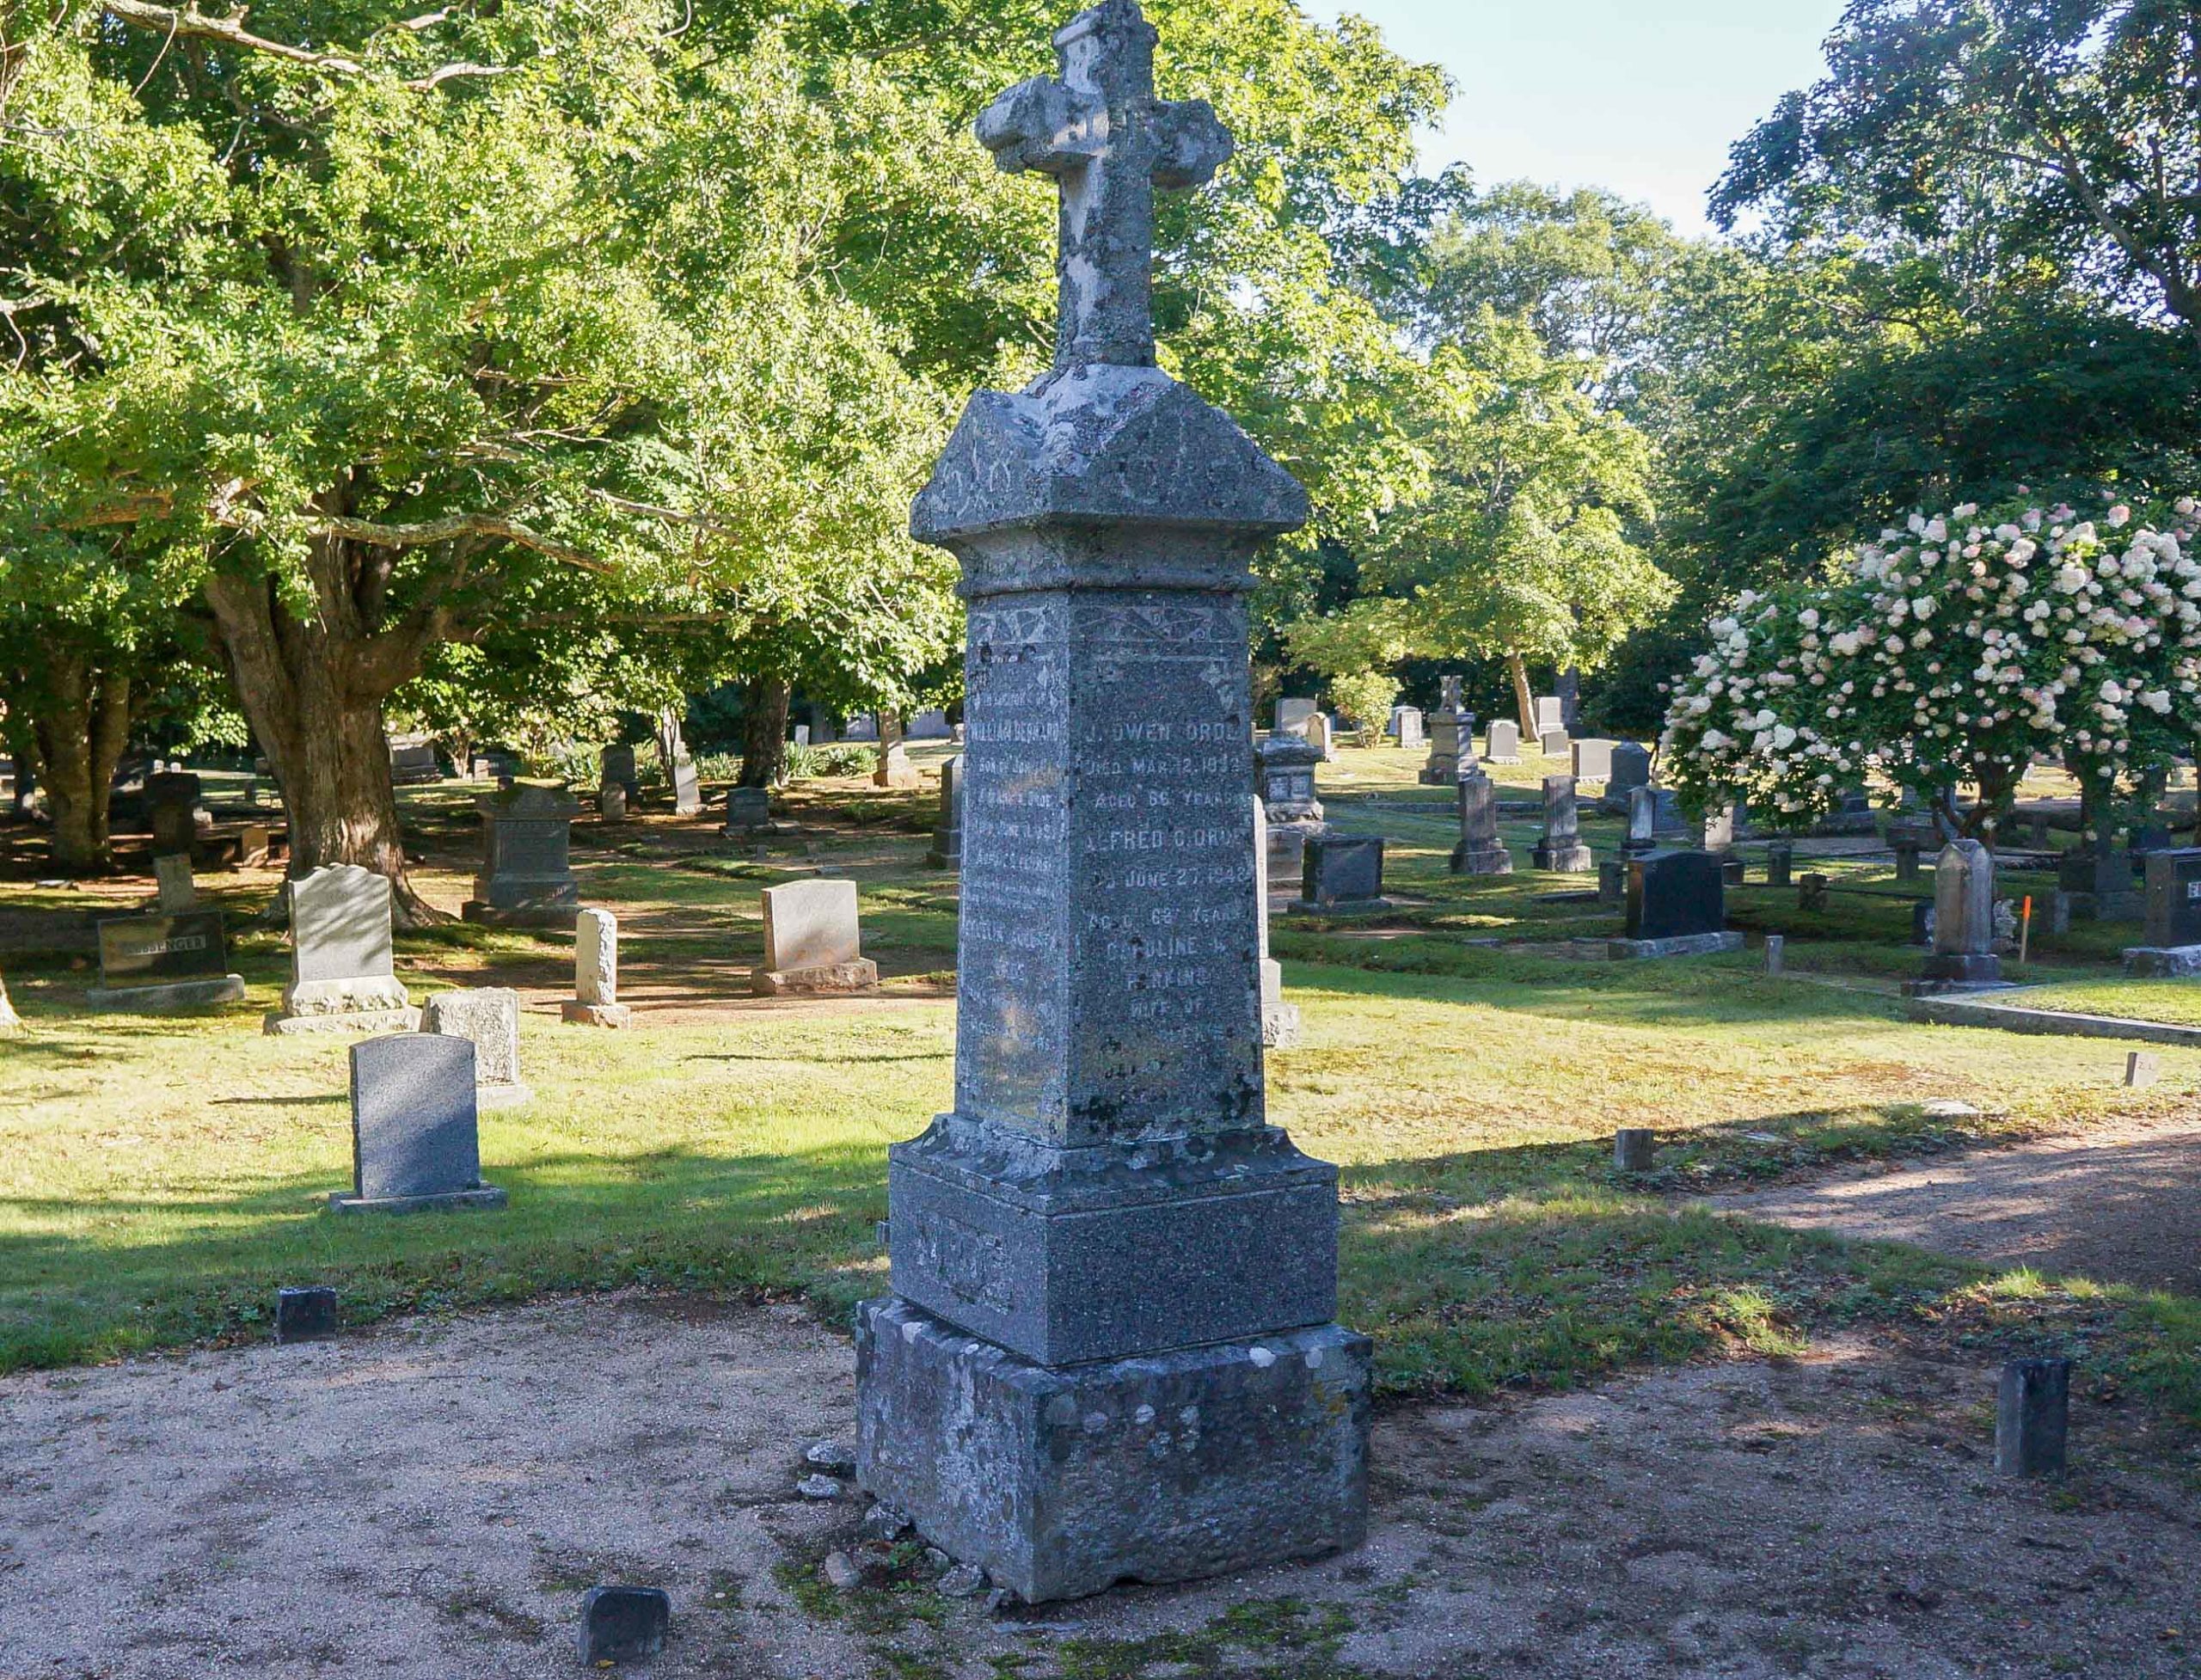 William Rutherford Perkins Grave site in Woodland Cemetery, Annapolis